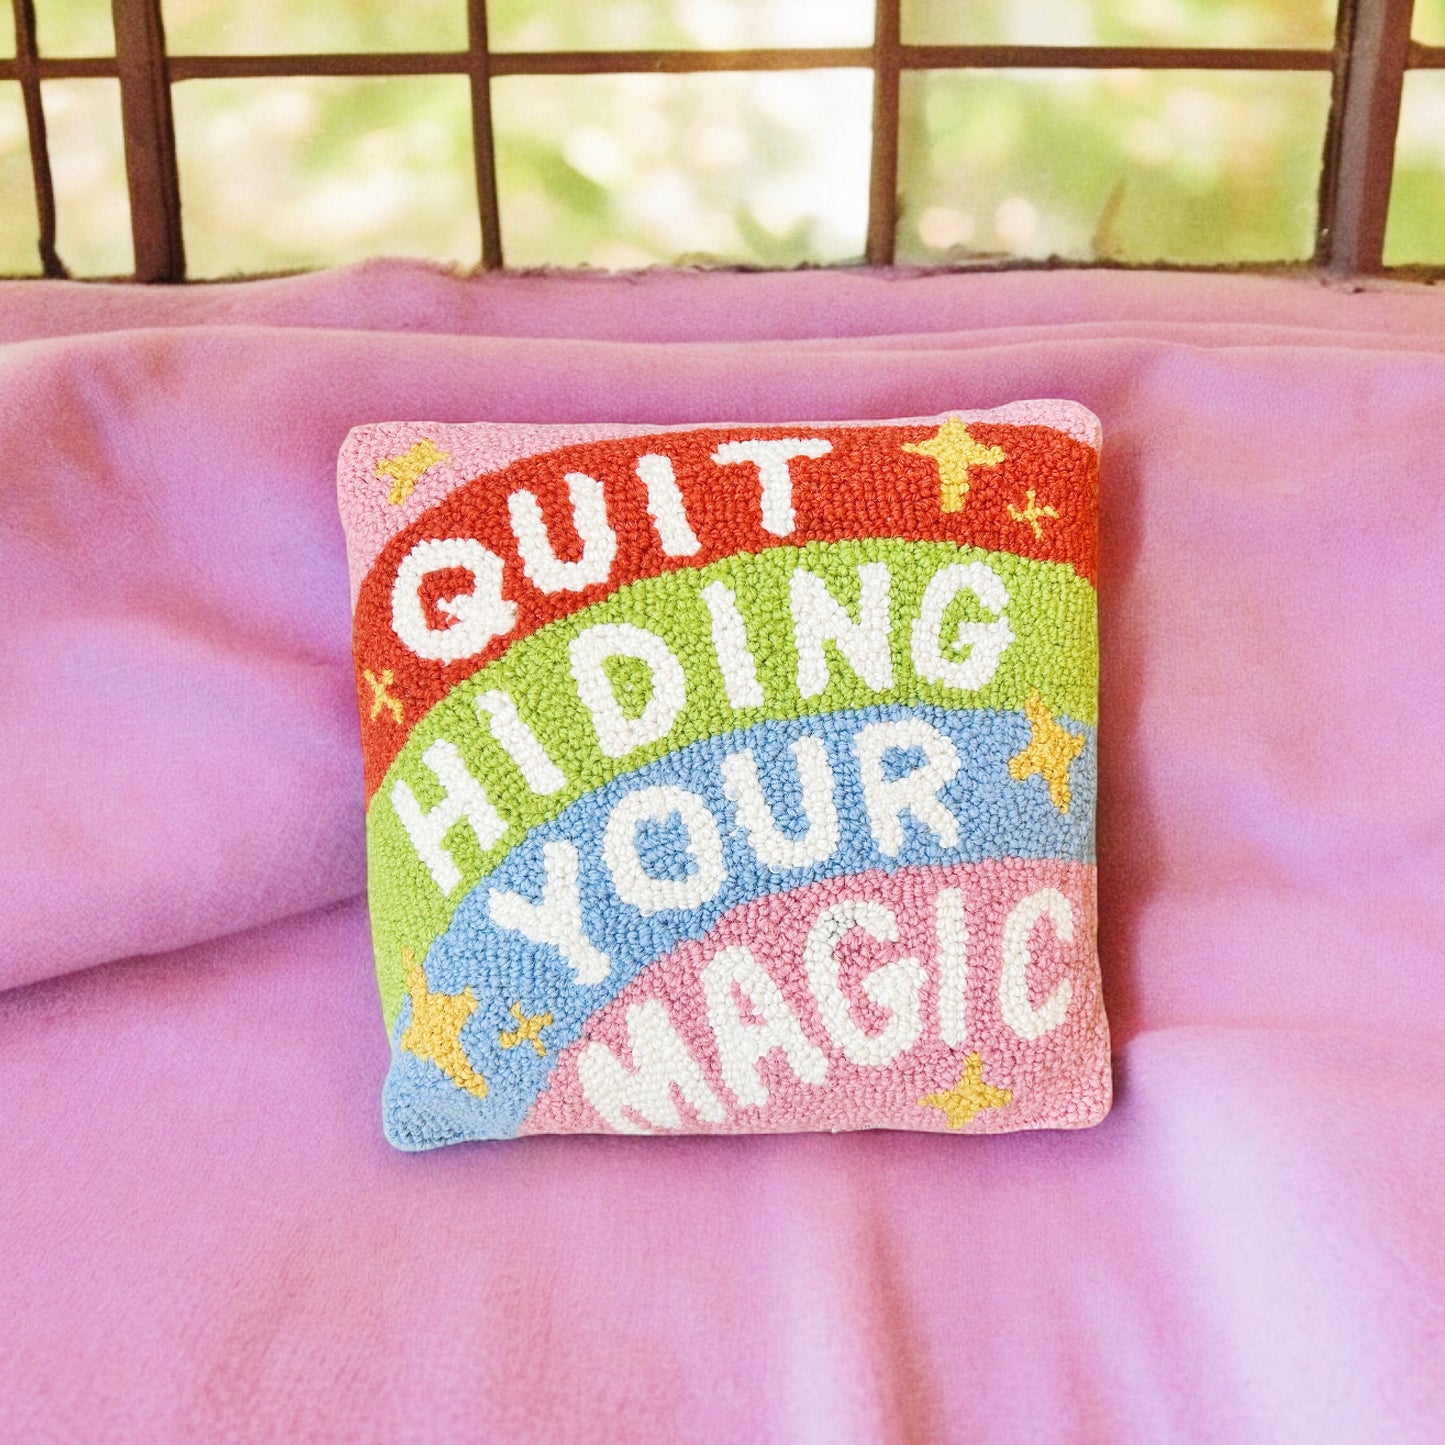 Quit Hiding Your Magic Hooked Pillow